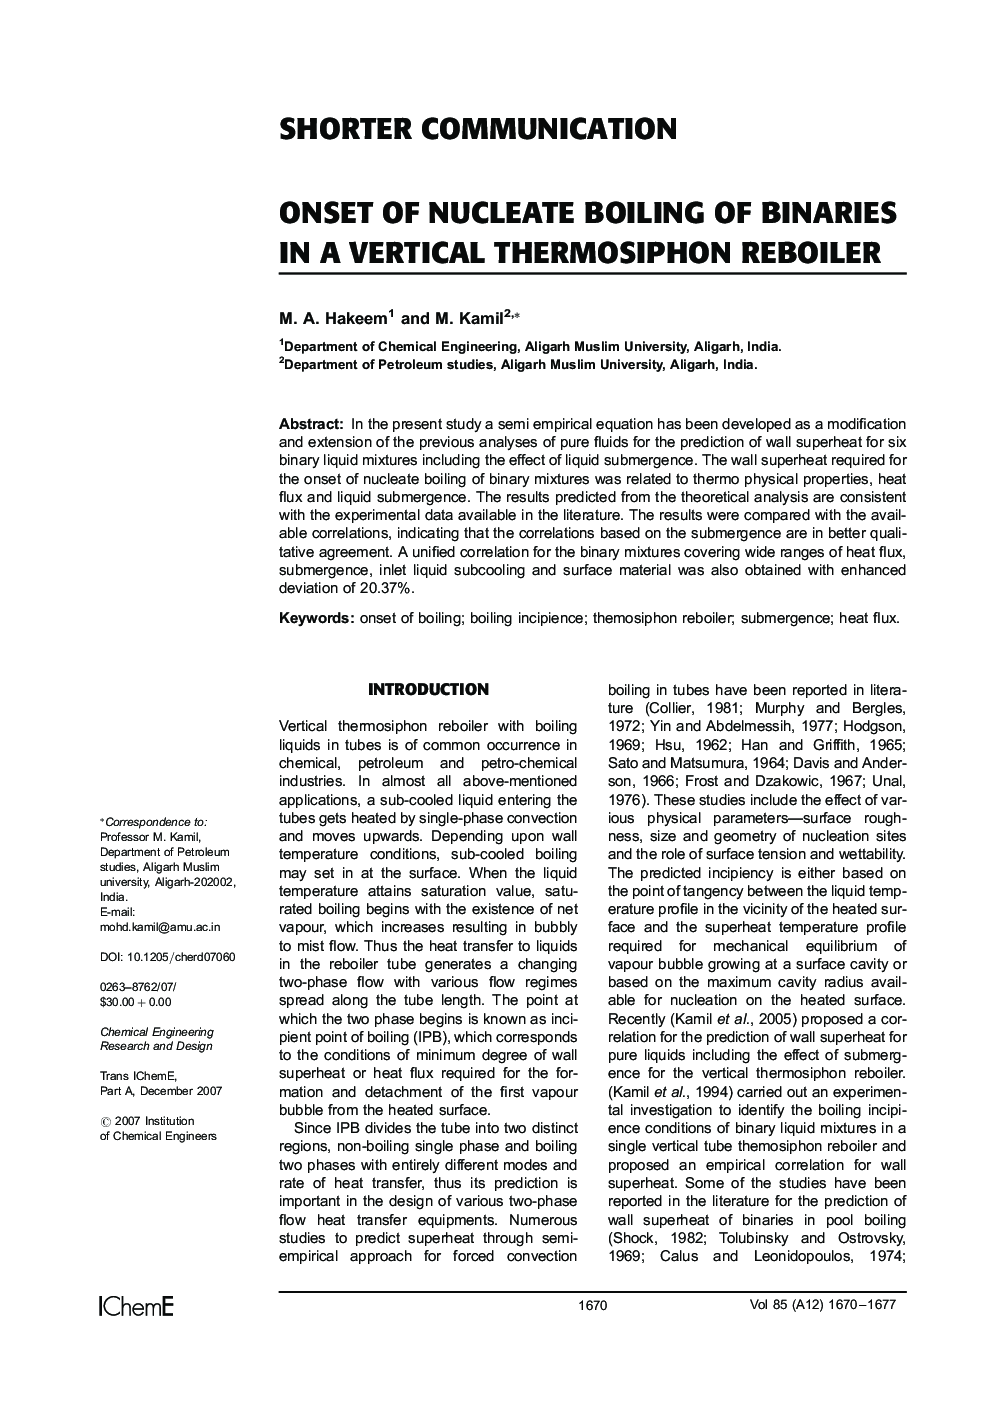 Onset of Nucleate Boiling of Binaries in a Vertical Thermosiphon Reboiler